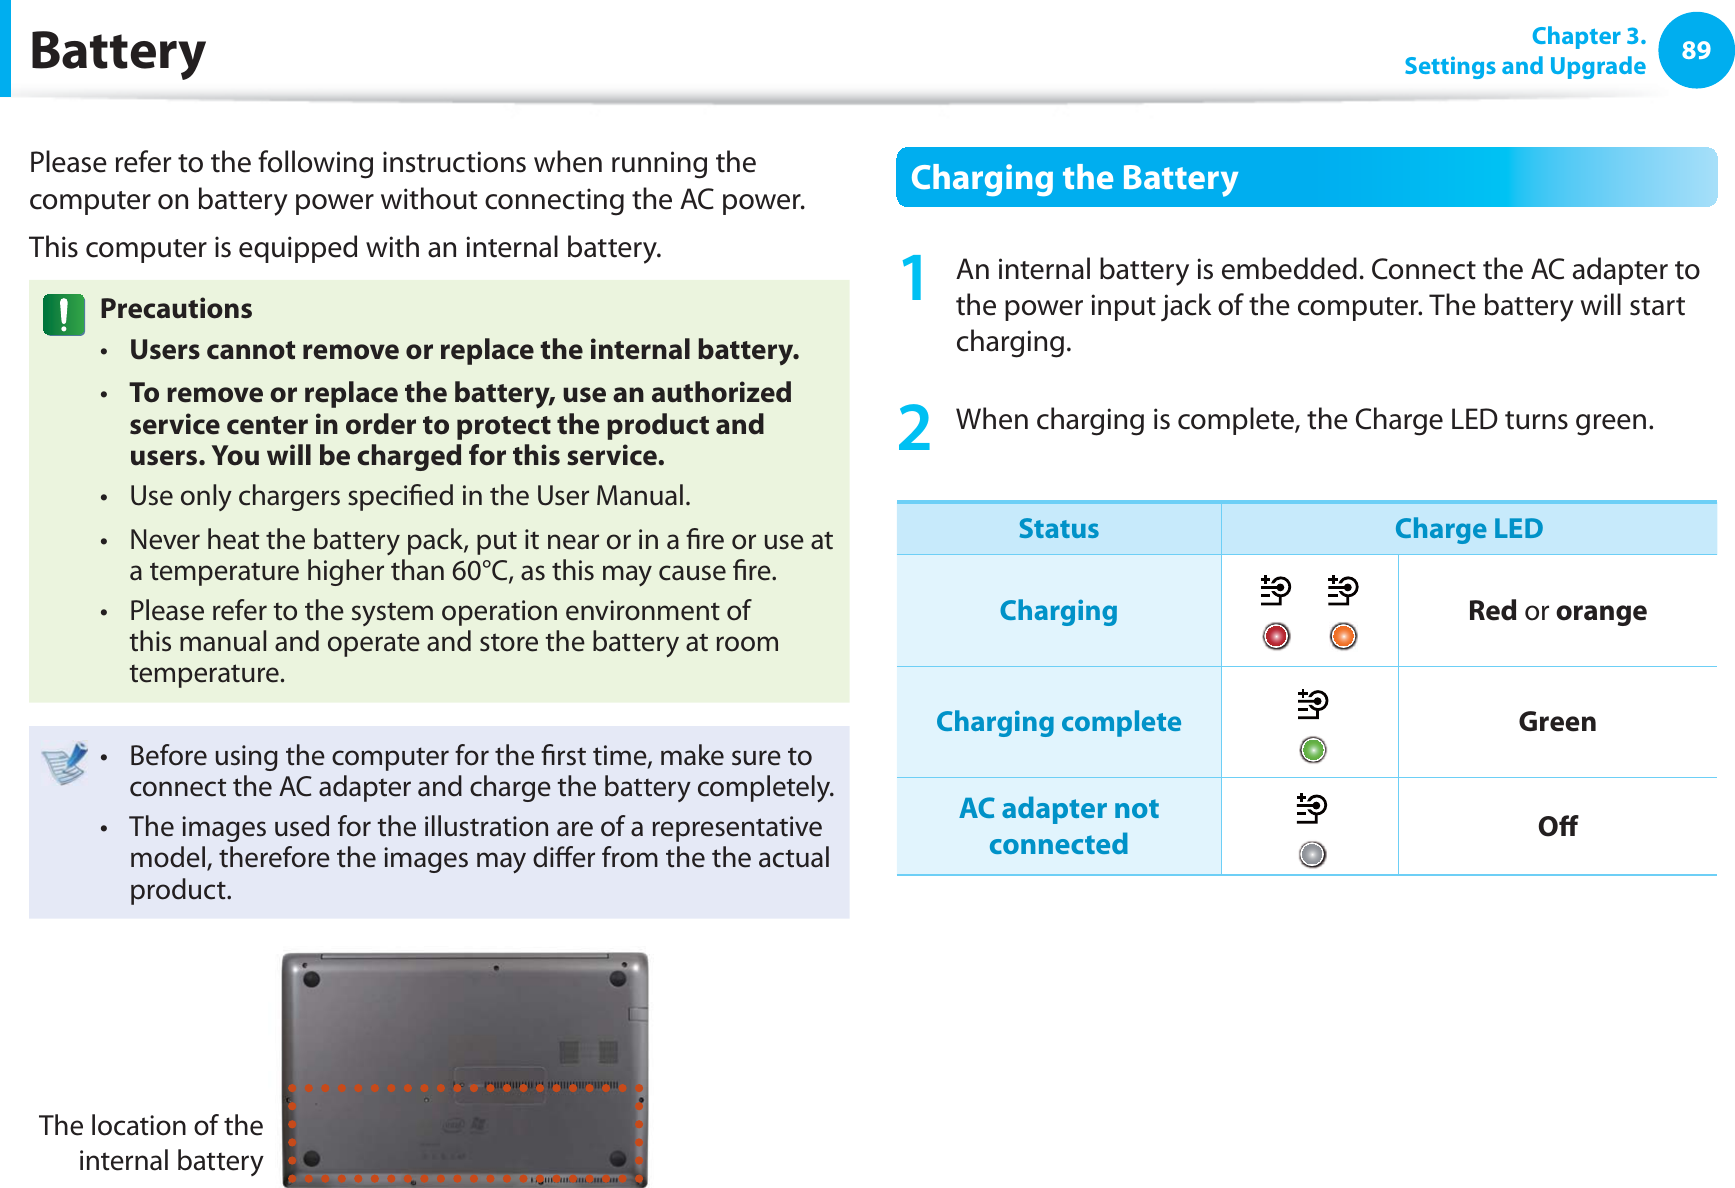 89 Chapter  3.Settings and Upgrade BatteryPlease refer to the following instructions when running the computer on battery power without connecting the AC power. This computer is equipped with an internal battery. PrecautionsUsers cannot remove or replace the internal battery. t To remove or replace the battery, use an authorized t service center in order to protect the product and users. You will be charged for this service.Use only chargers speci ed in the User Manual.t Never heat the battery pack, put it near or in a  re or use at t a temperature higher than 60°C, as this may cause  re.Please refer to the system operation environment of t this manual and operate and store the battery at room temperature.Before using the computer for the  rst time, make sure to t connect the AC adapter and charge the battery completely.The images used for the illustration are of a representative t model, therefore the images may di er from the the actual product.The location of the internal battery Charging the Battery1  An internal battery is embedded. Connect the AC adapter to the power input jack of the computer. The battery will start charging.2  When charging is complete, the Charge LED turns green.Status Charge LEDCharging Red or orangeCharging complete GreenAC adapter not connected O 